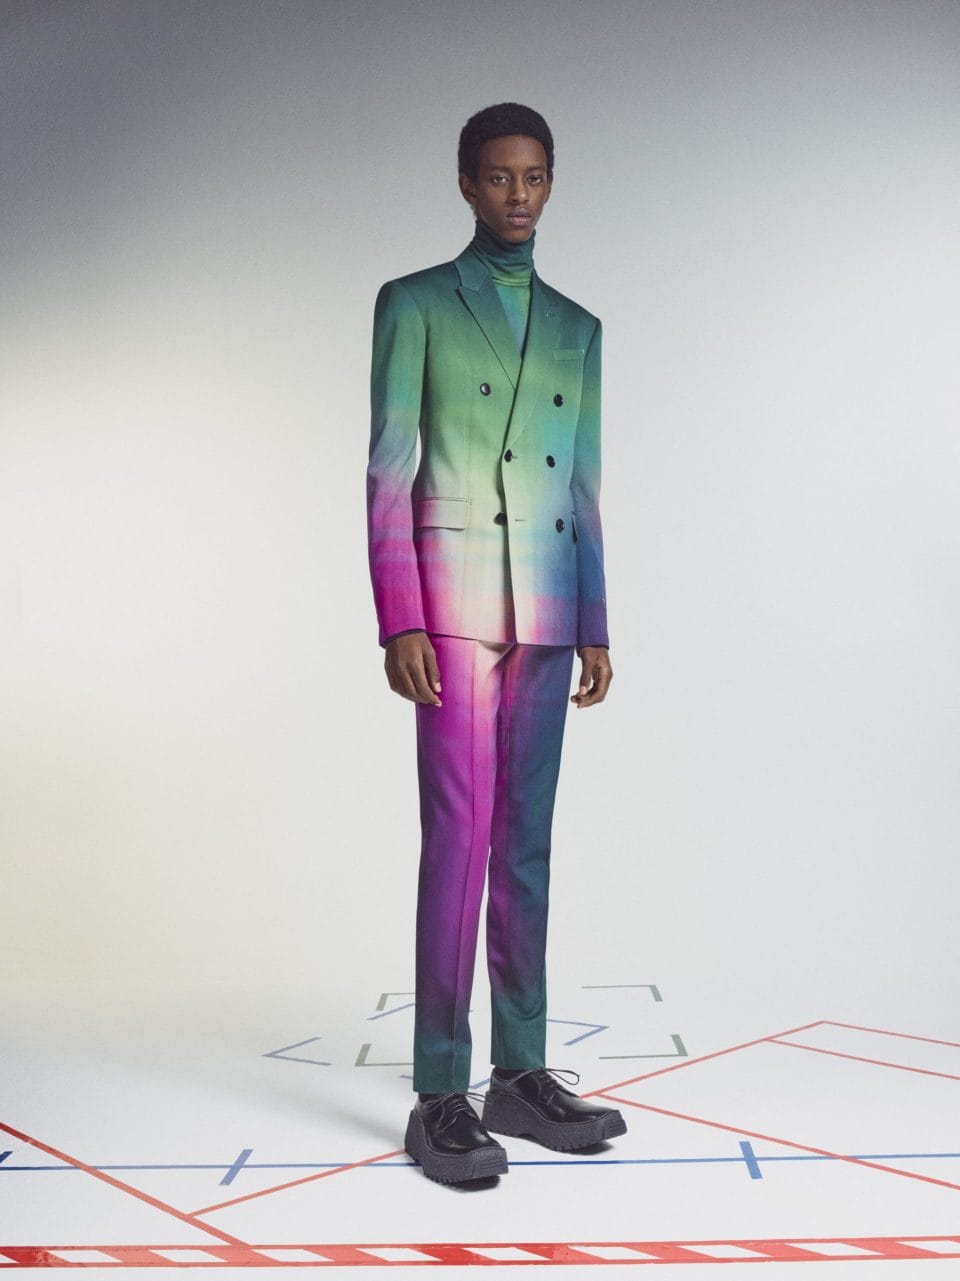 Berluti Fall Winter 2021 Presents A "Touching" Collection